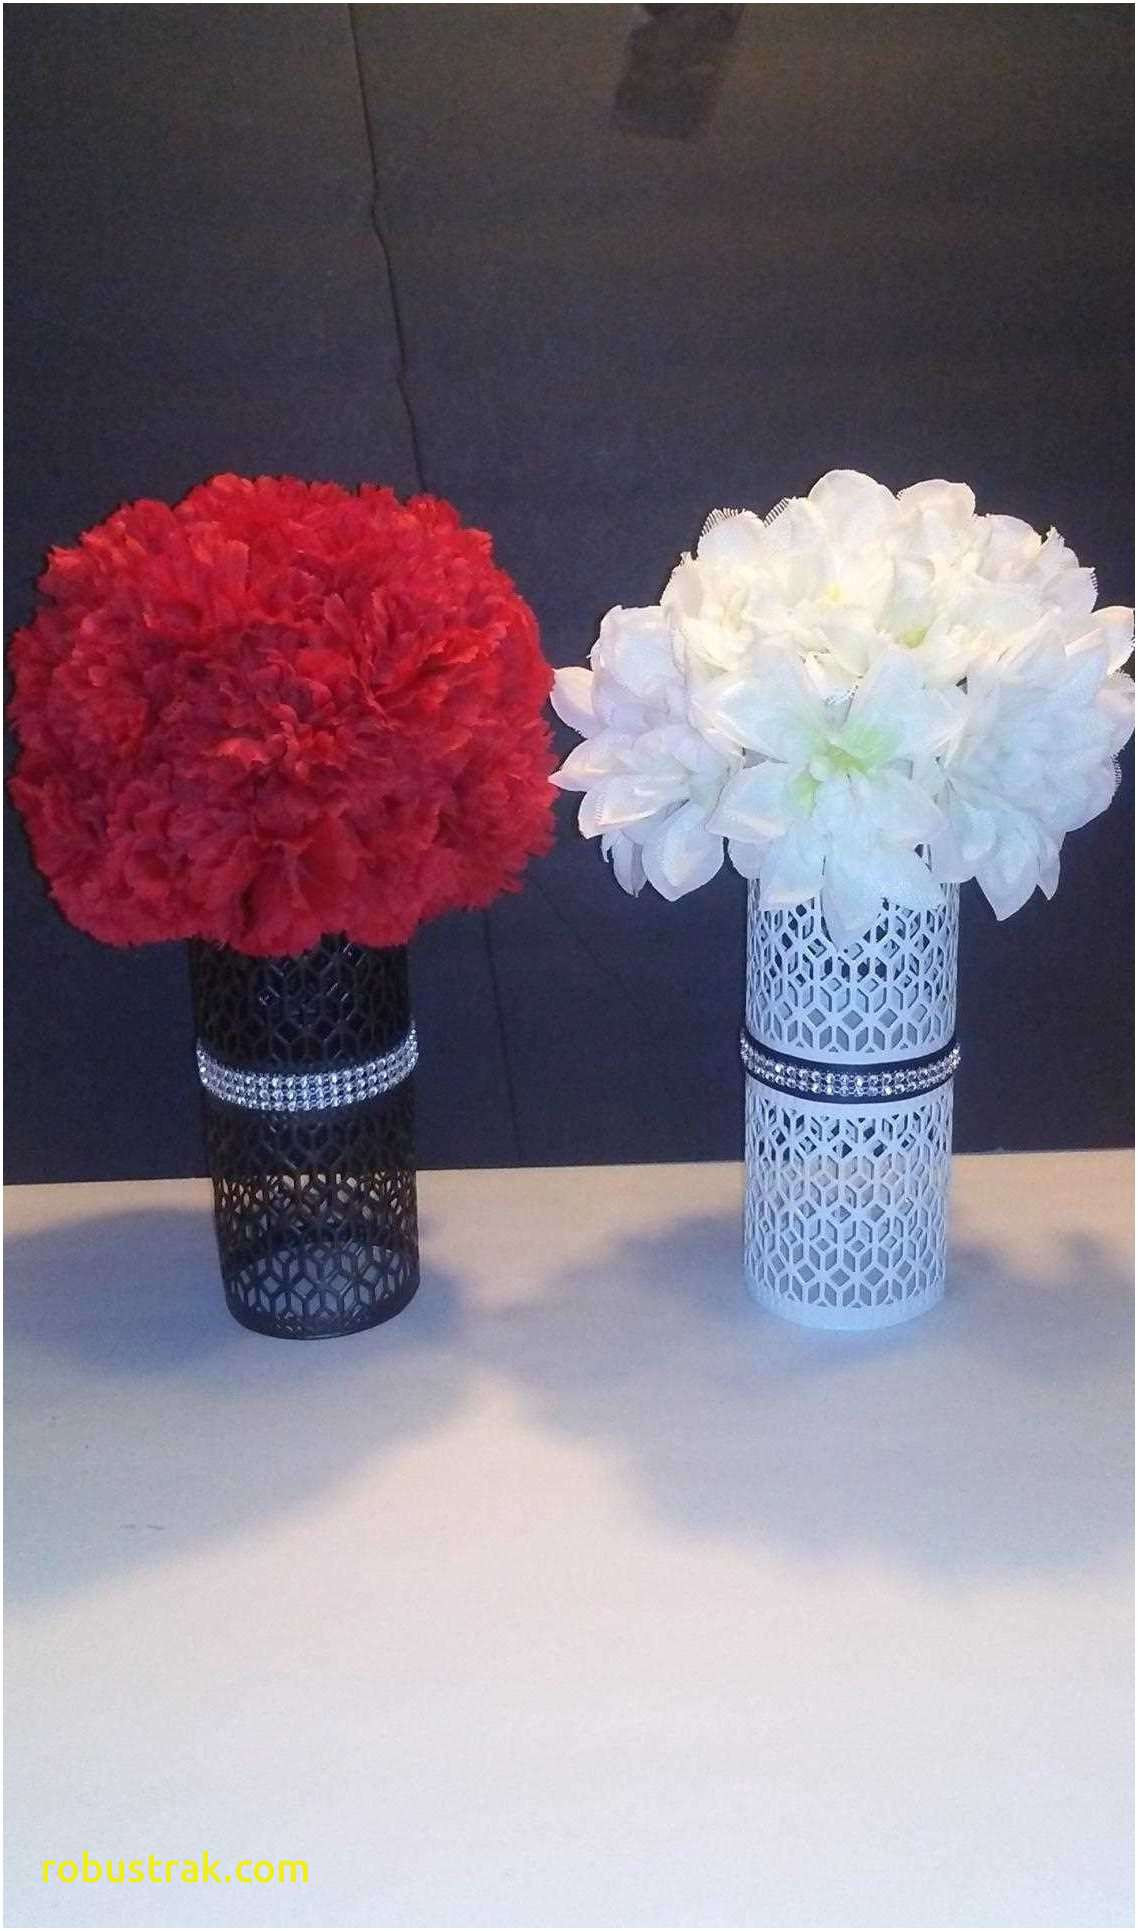 17 Stunning Plastic Floor Vase 2024 free download plastic floor vase of inspirational how to decorate roses in a vase home design ideas with regard to wedding decor flowers astounding dollar tree wedding decorations awesome h vases dollar v